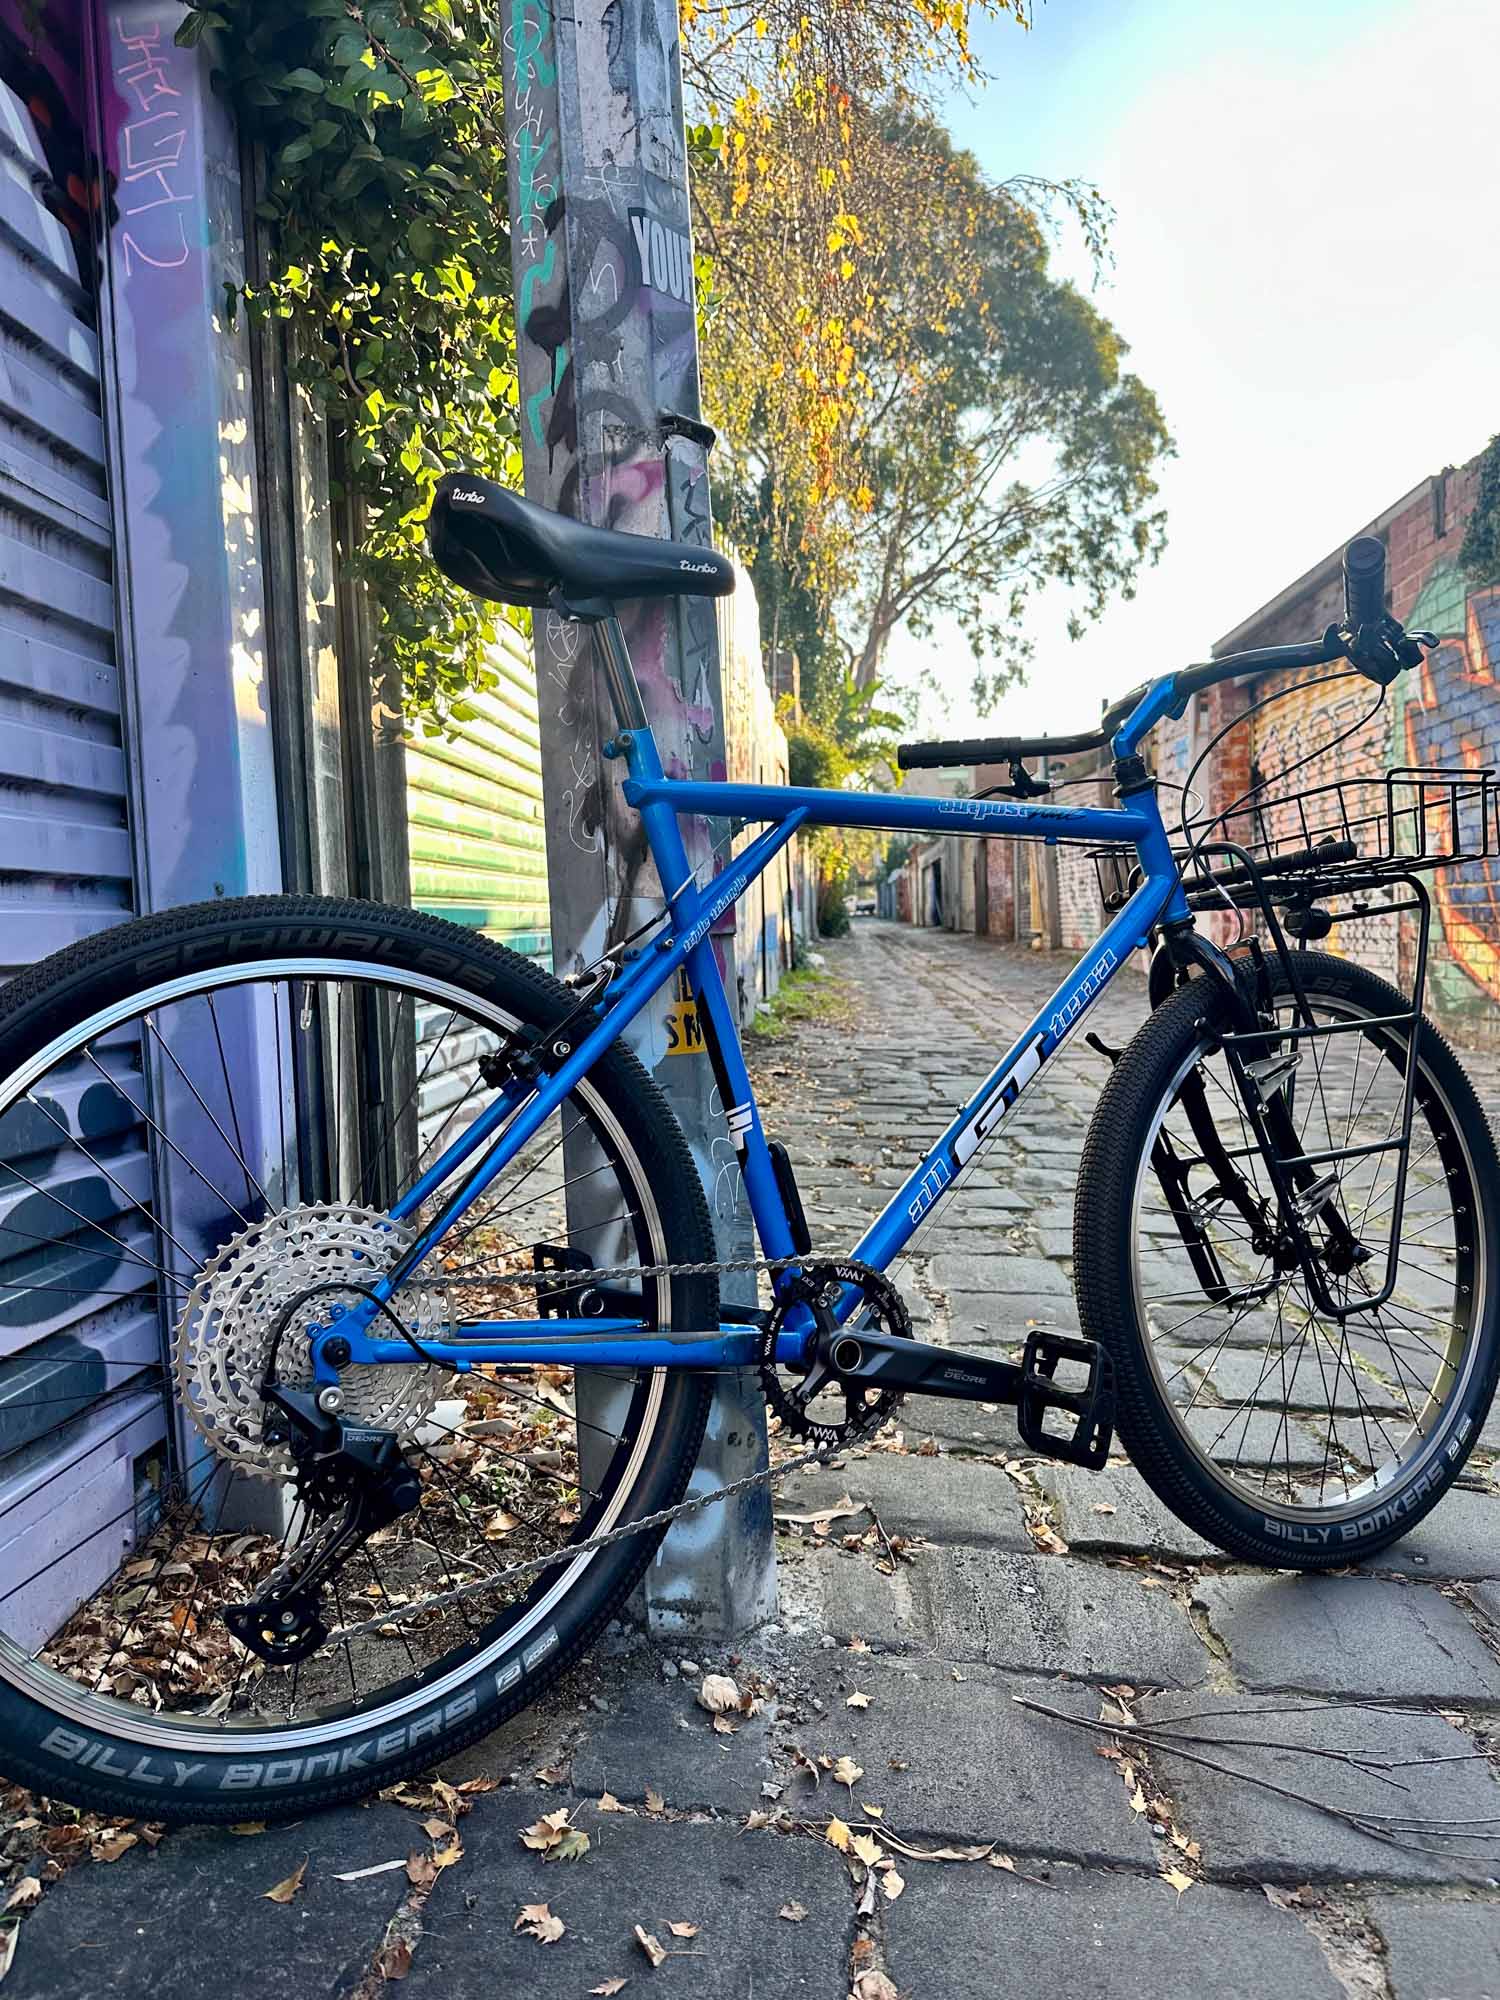 A blue GT mountain bike with swept back bars, a dynamo light and front rack in a cobbled laneway. 